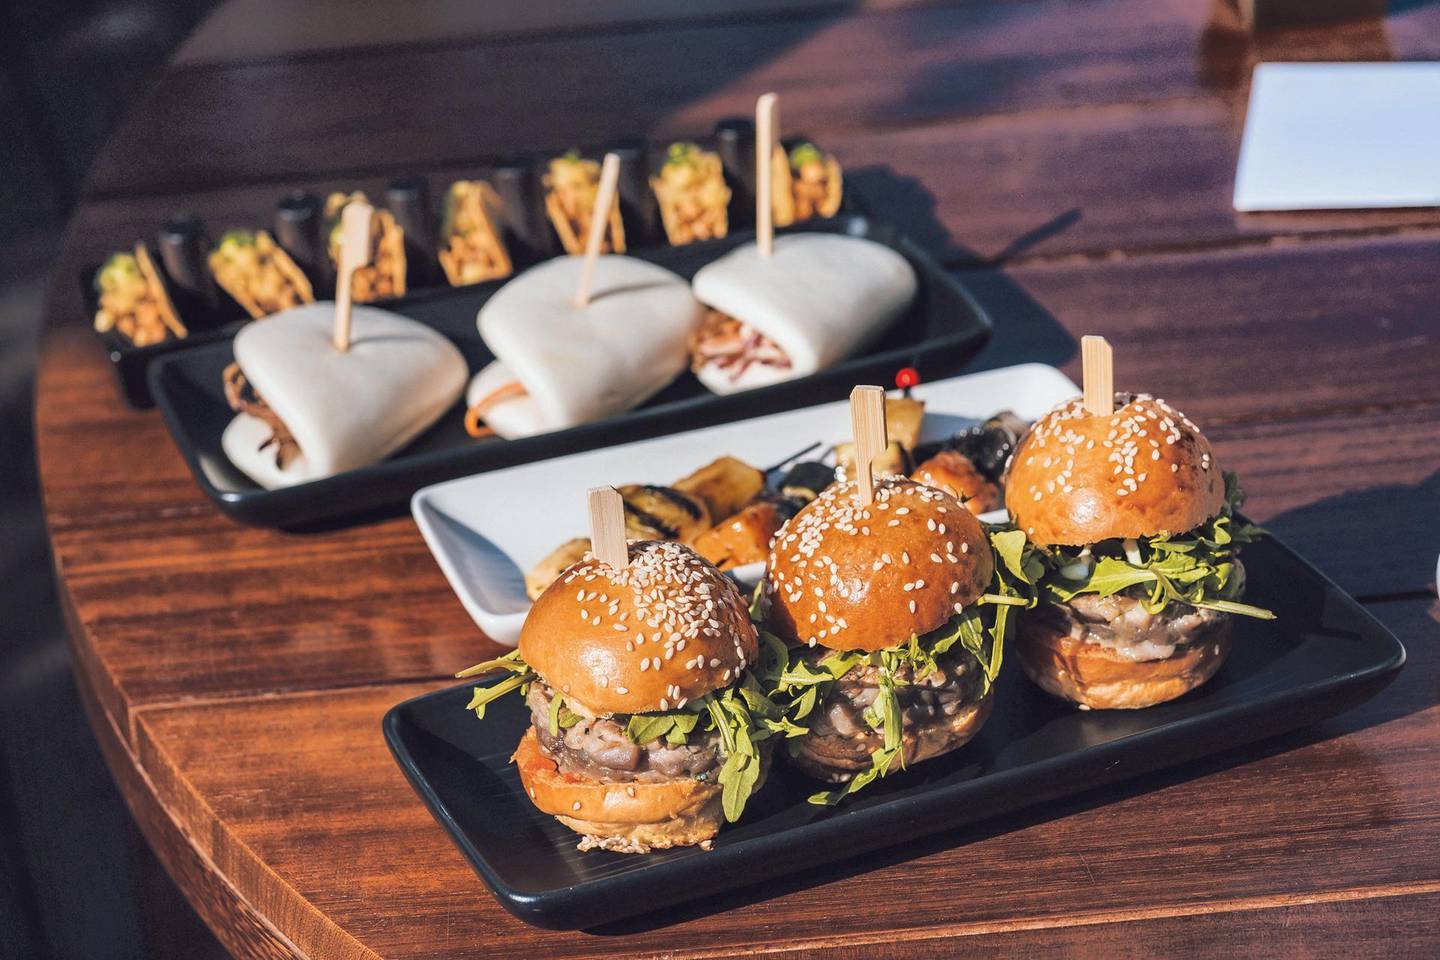 Annex at The Abu Dhabi Edition will be serving bites like bao buns, shrimp tacos, pulled beef nachos and beef sliders. Courtesy of The Abu Dhabi Edition